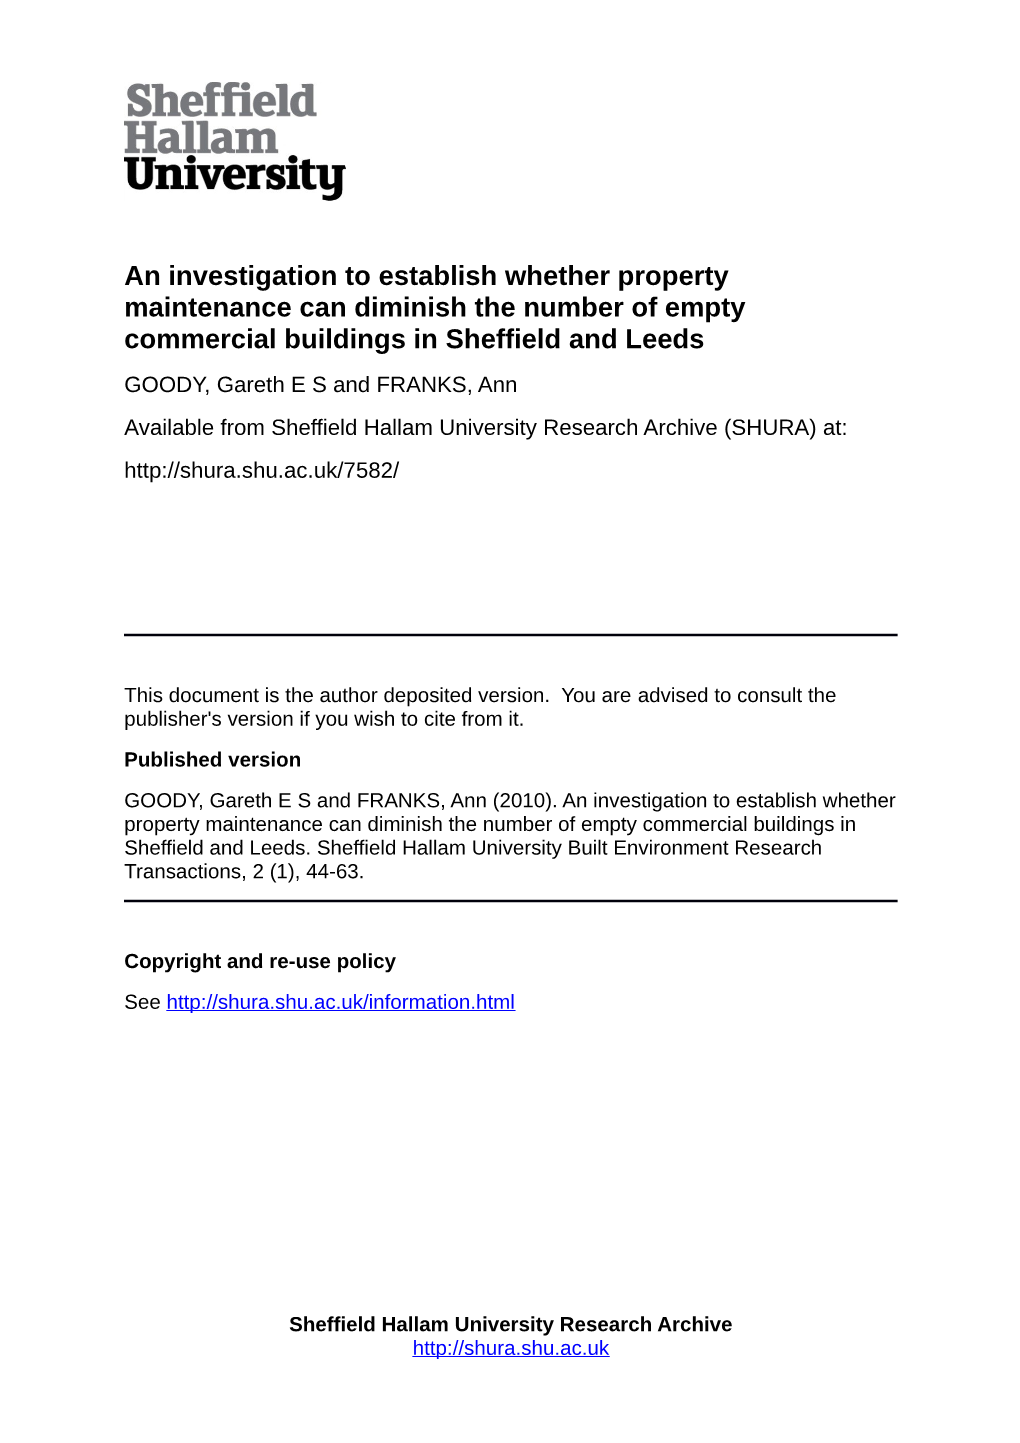 An Investigation to Establish Whether Property Maintenance Can Diminish